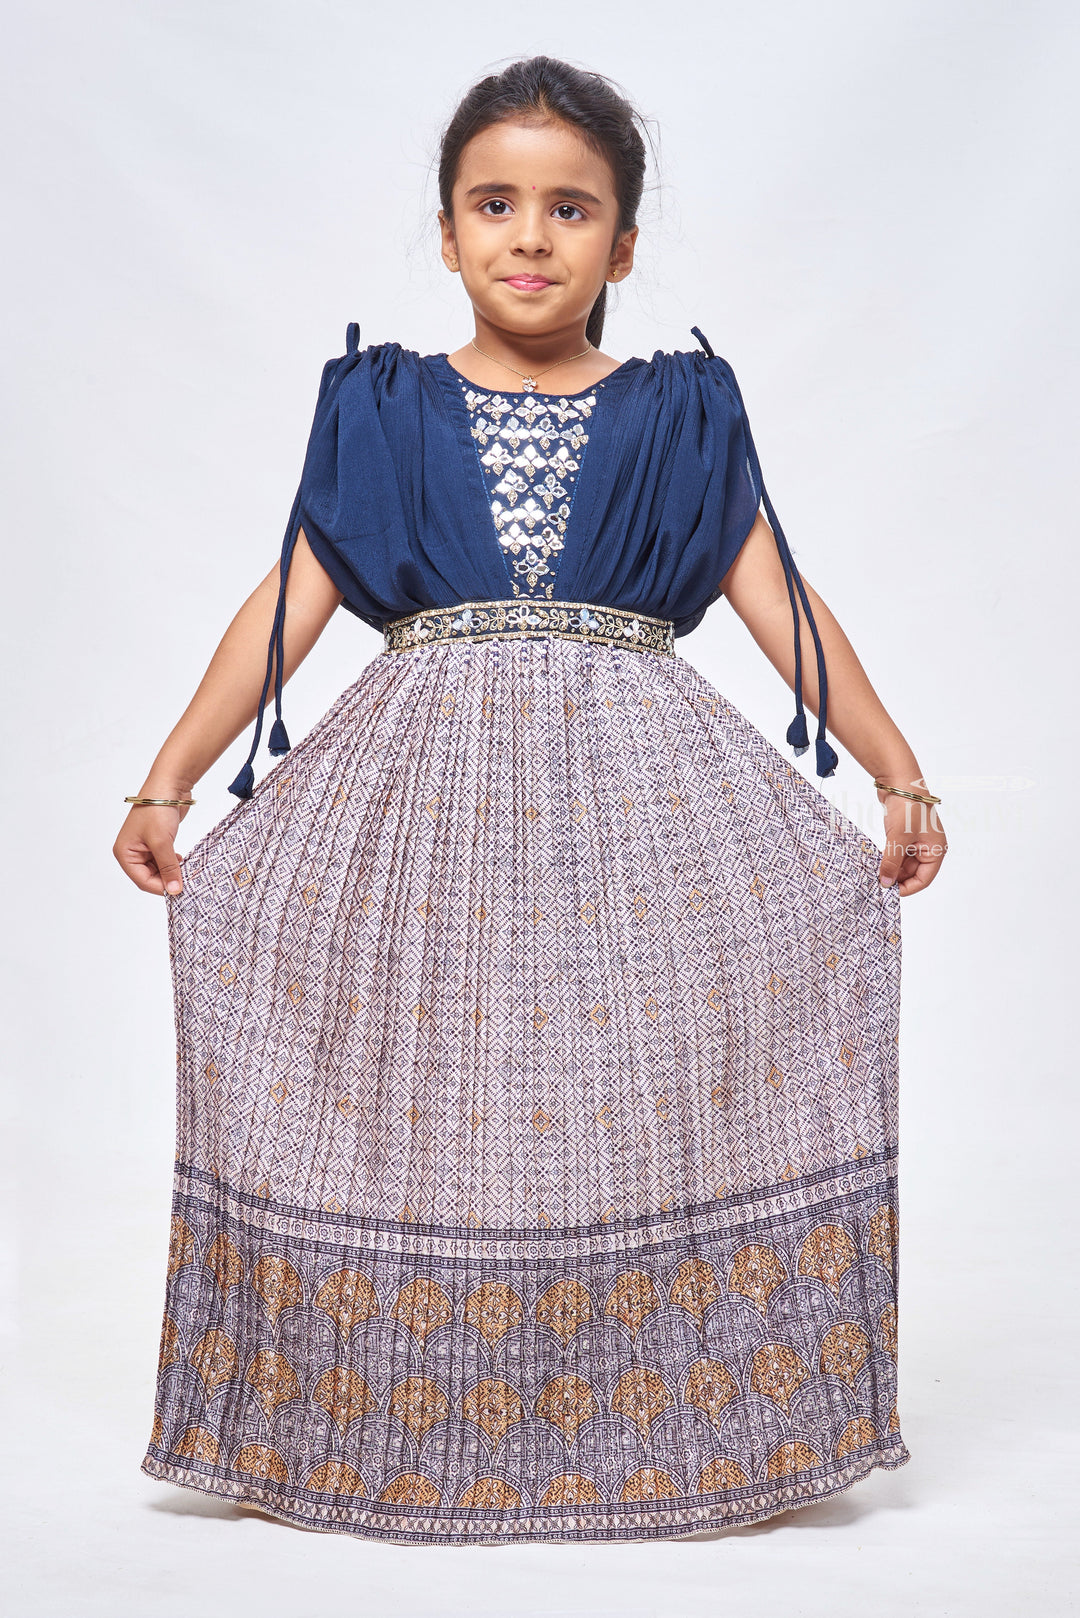 The Nesavu Girls Party Gown Gray Sequin & Stone Splendor: Pleated Gowns in Geometric Patterns for the Young Girls Nesavu 20 (3Y) / Gray / Chinnon GA143A-20 Anarkali Designer Suits Online Shopping | Baby Anarkali Dress | the Nesavu